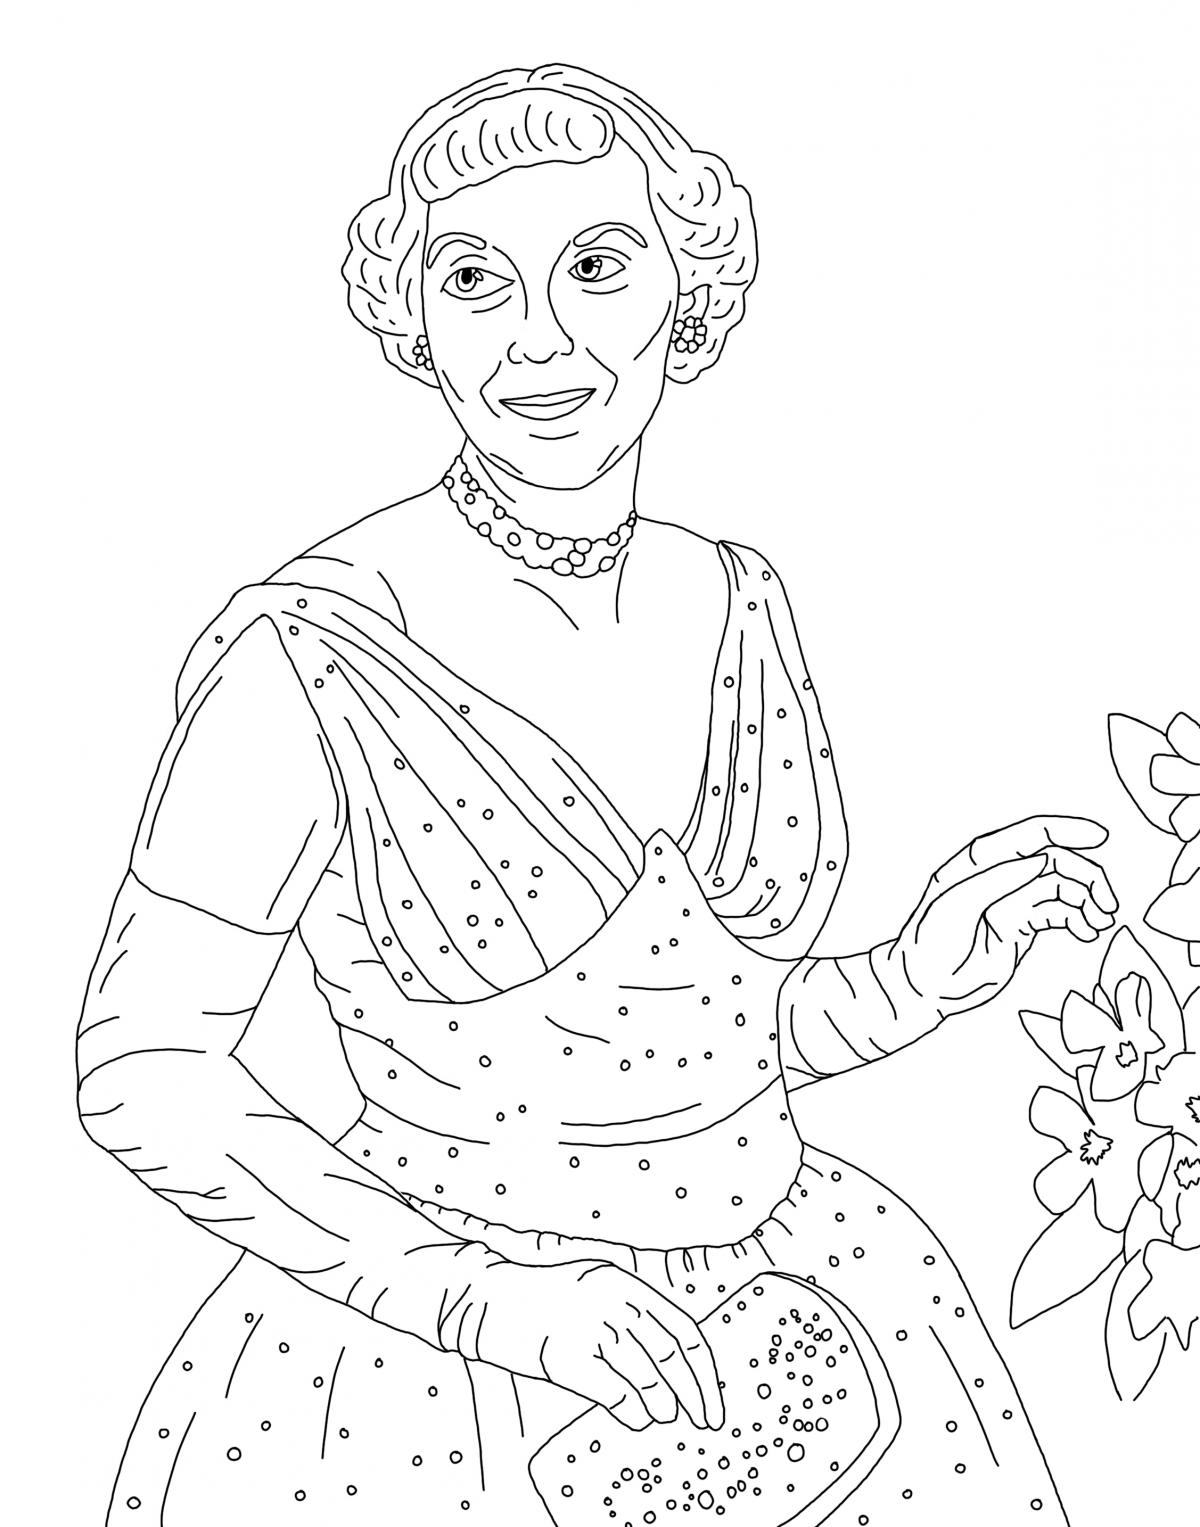 62-91 coloring page image